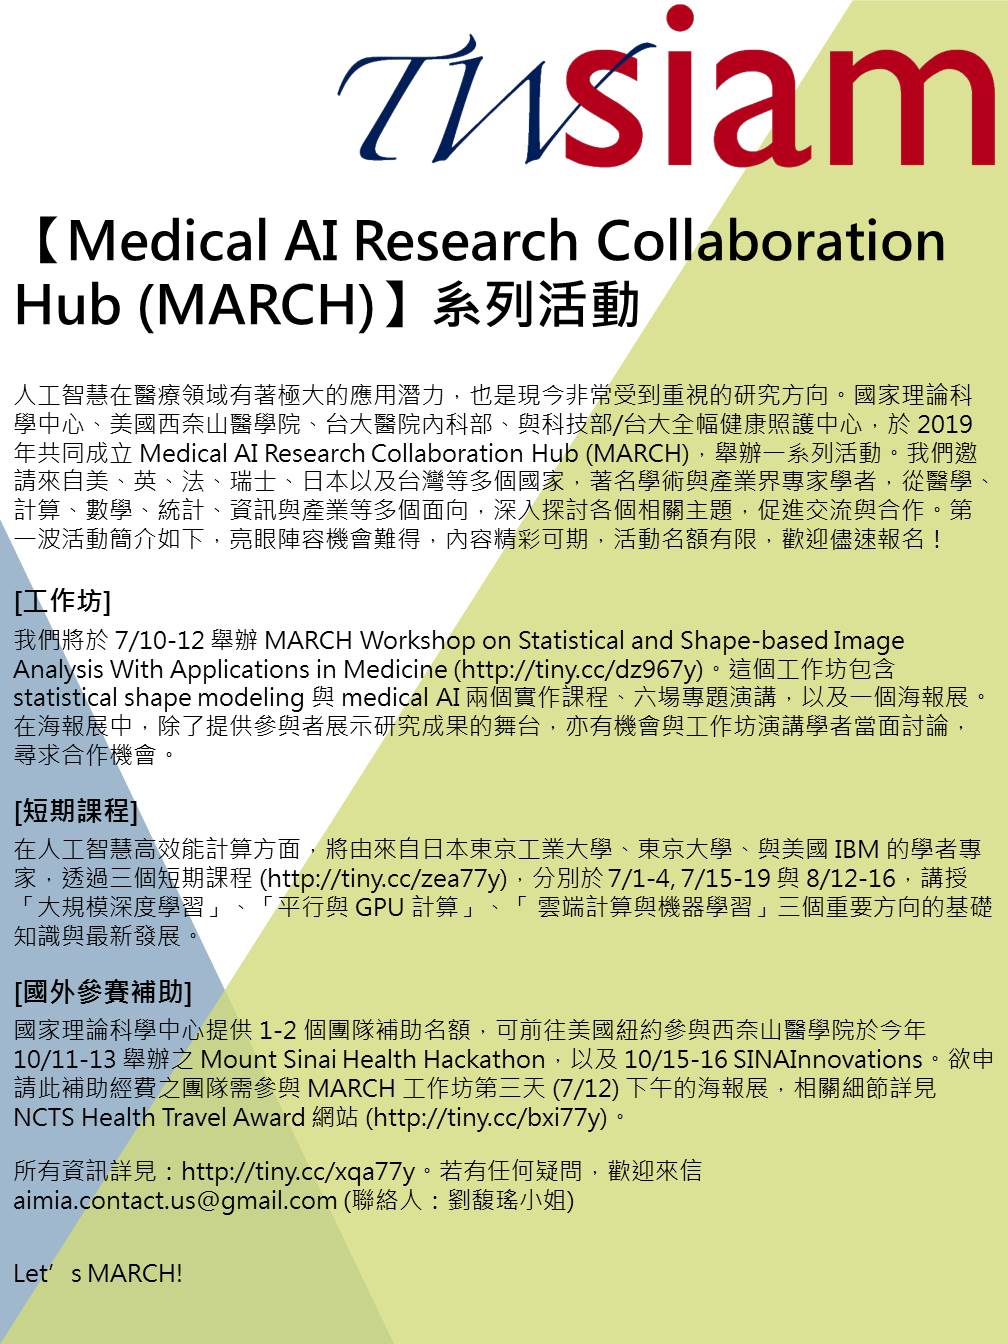 2019 06 18 Medical AI Research Collaboration Hub MARCH 系列活動